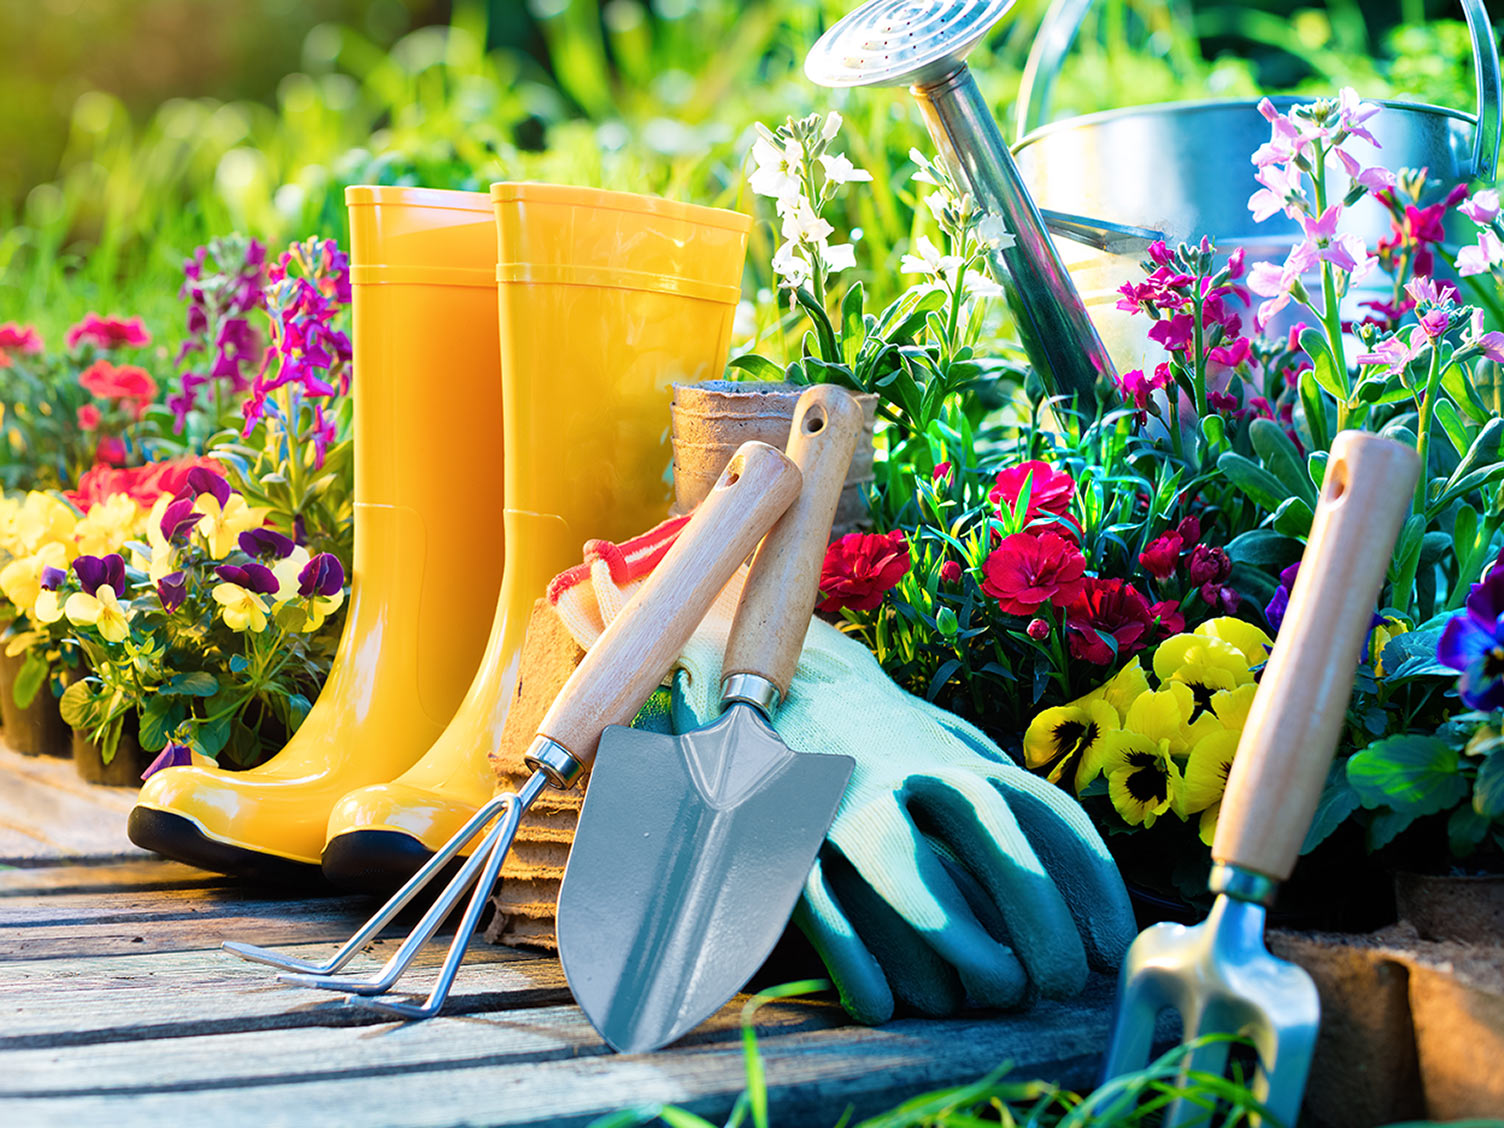 How to get the garden ready for Autumn